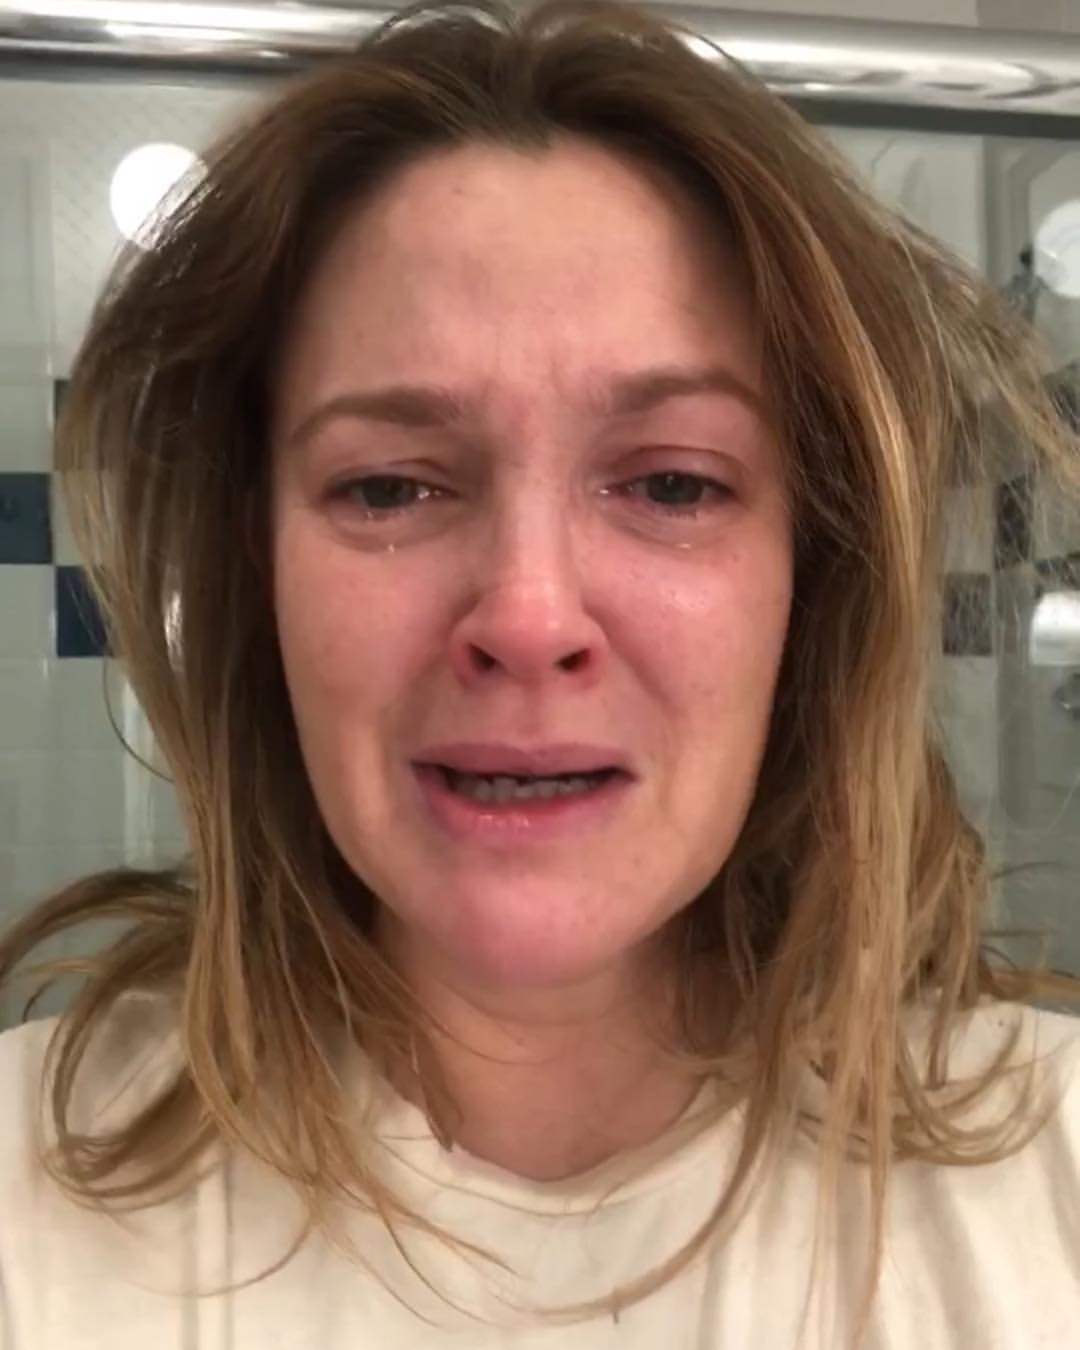 Actress Drew Barrymore posted this photo of her crying on social media. Now you can get the just-been-crying look using make-up. Photo: Instagram/@drewbarrymore